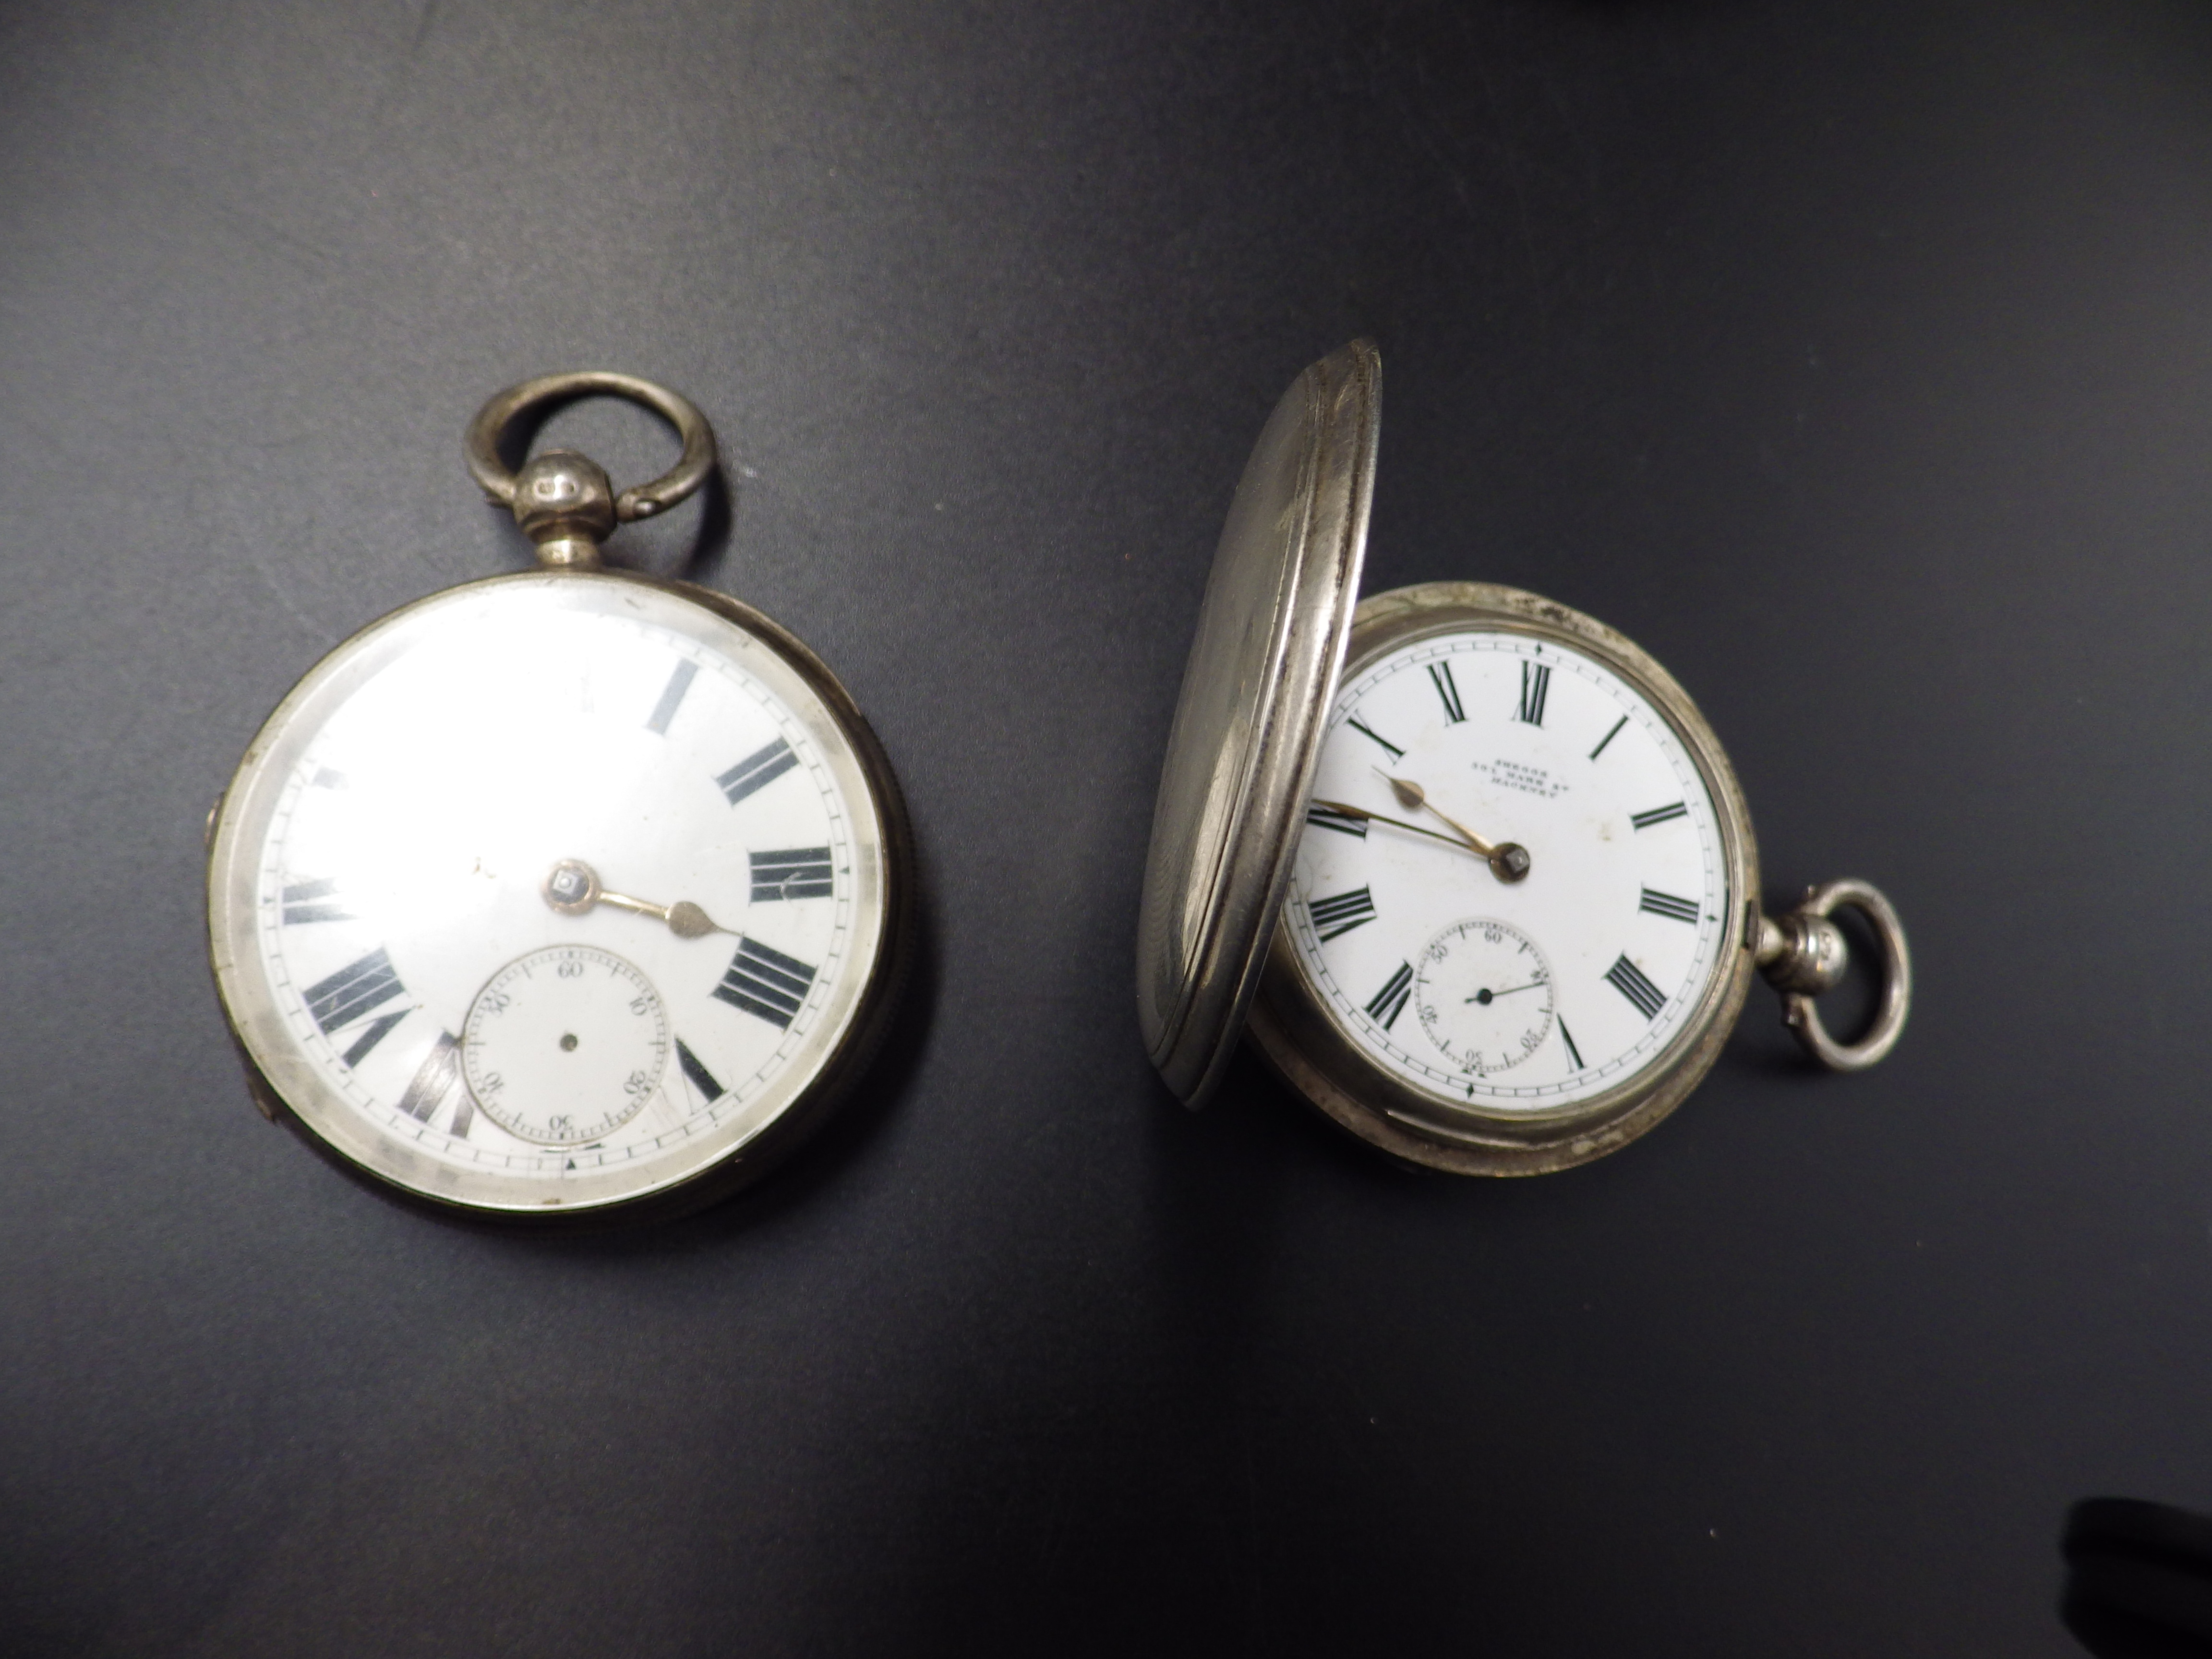 5 pocket watches - 2 are Silver cased both hallmarked Chester 1892 and 1900 hunter pocket watch ( - Image 3 of 6